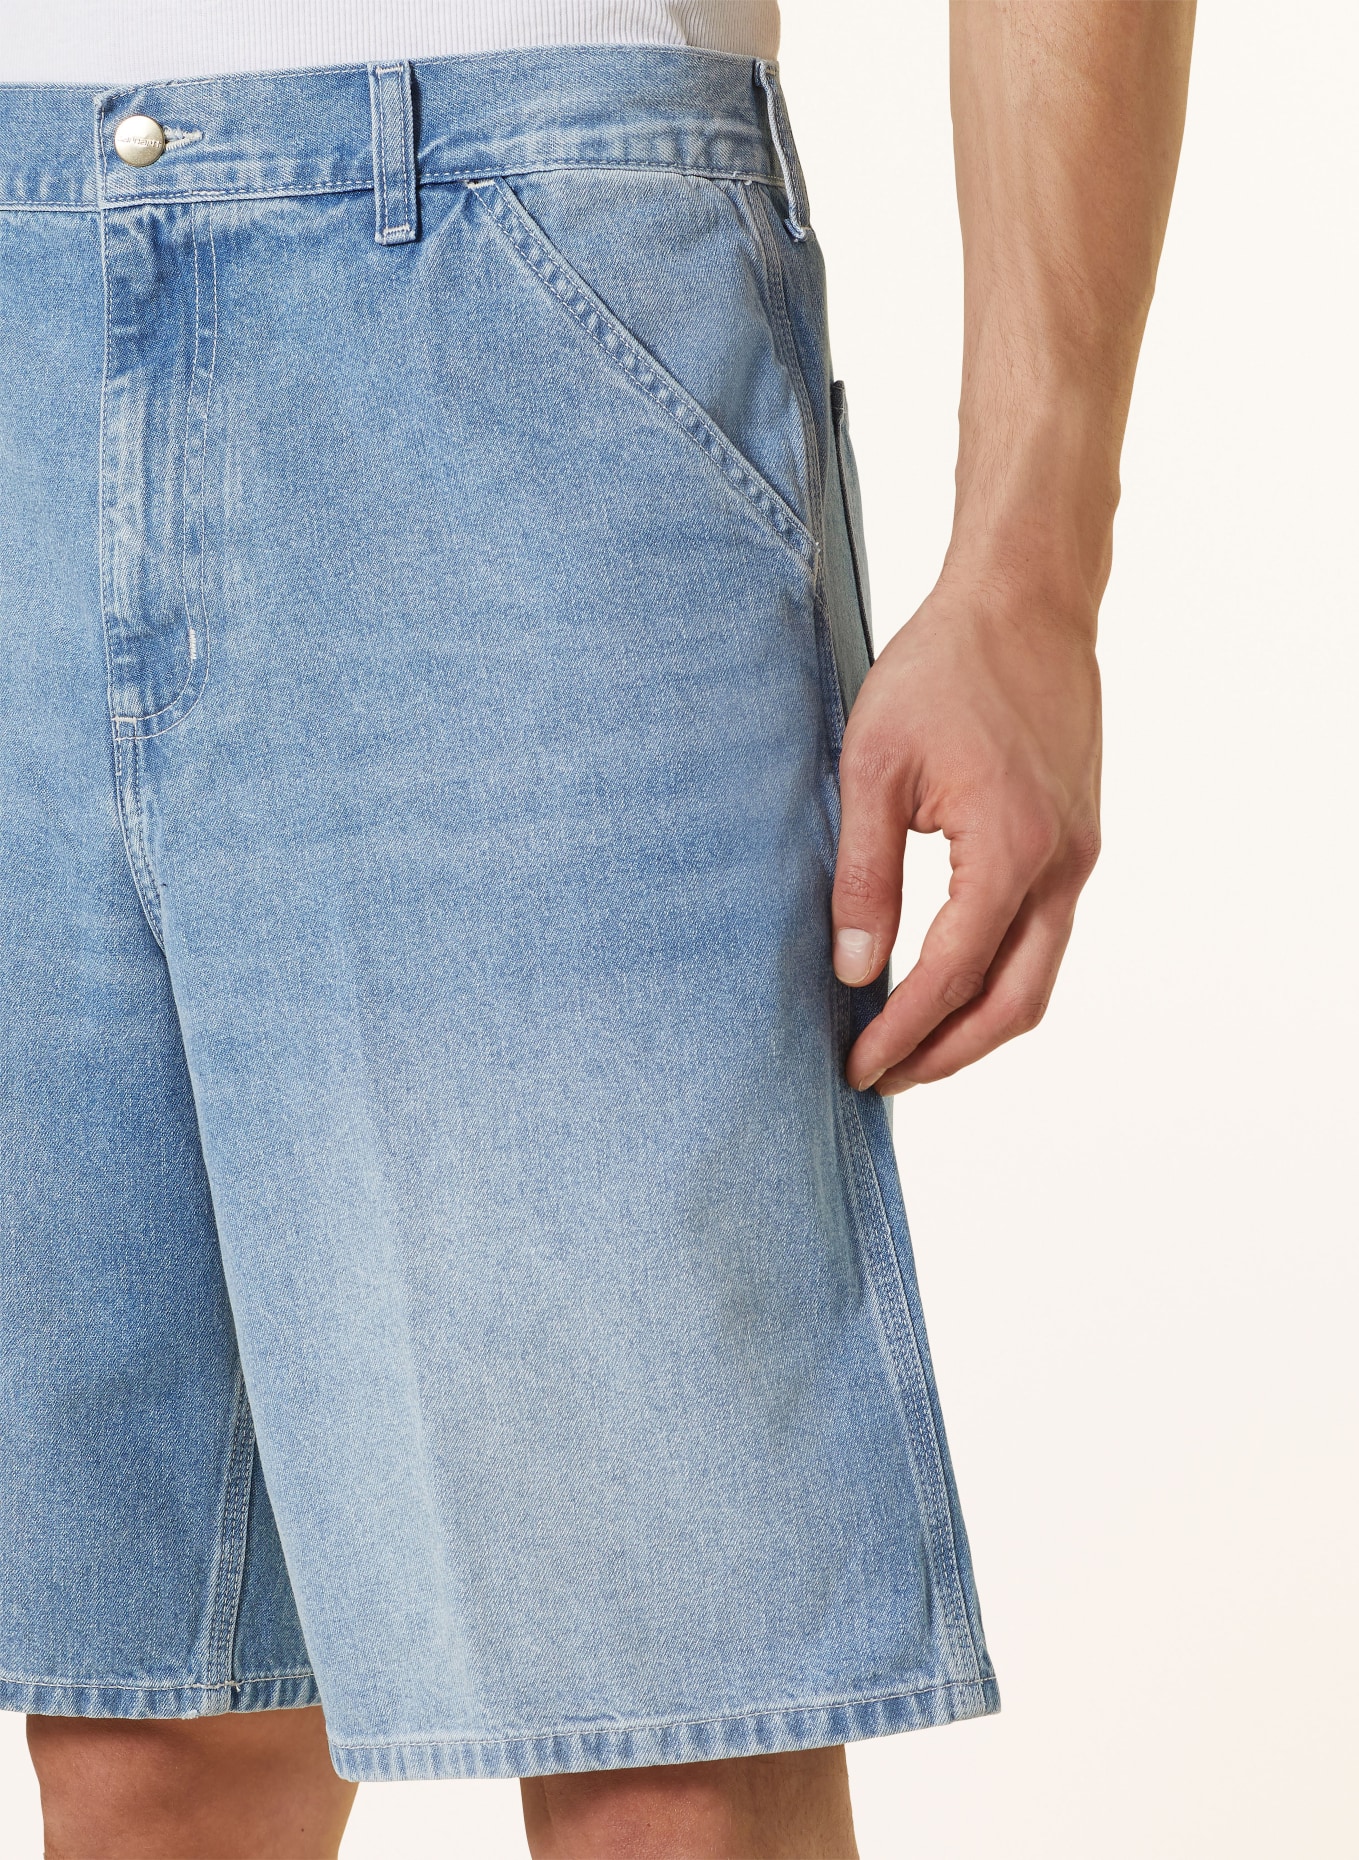 carhartt WIP Jeans-Shorts NORCO Relaxed Fit, Farbe: I033333 01ZO BLUE LIGHT TRUE WASHED (Bild 5)